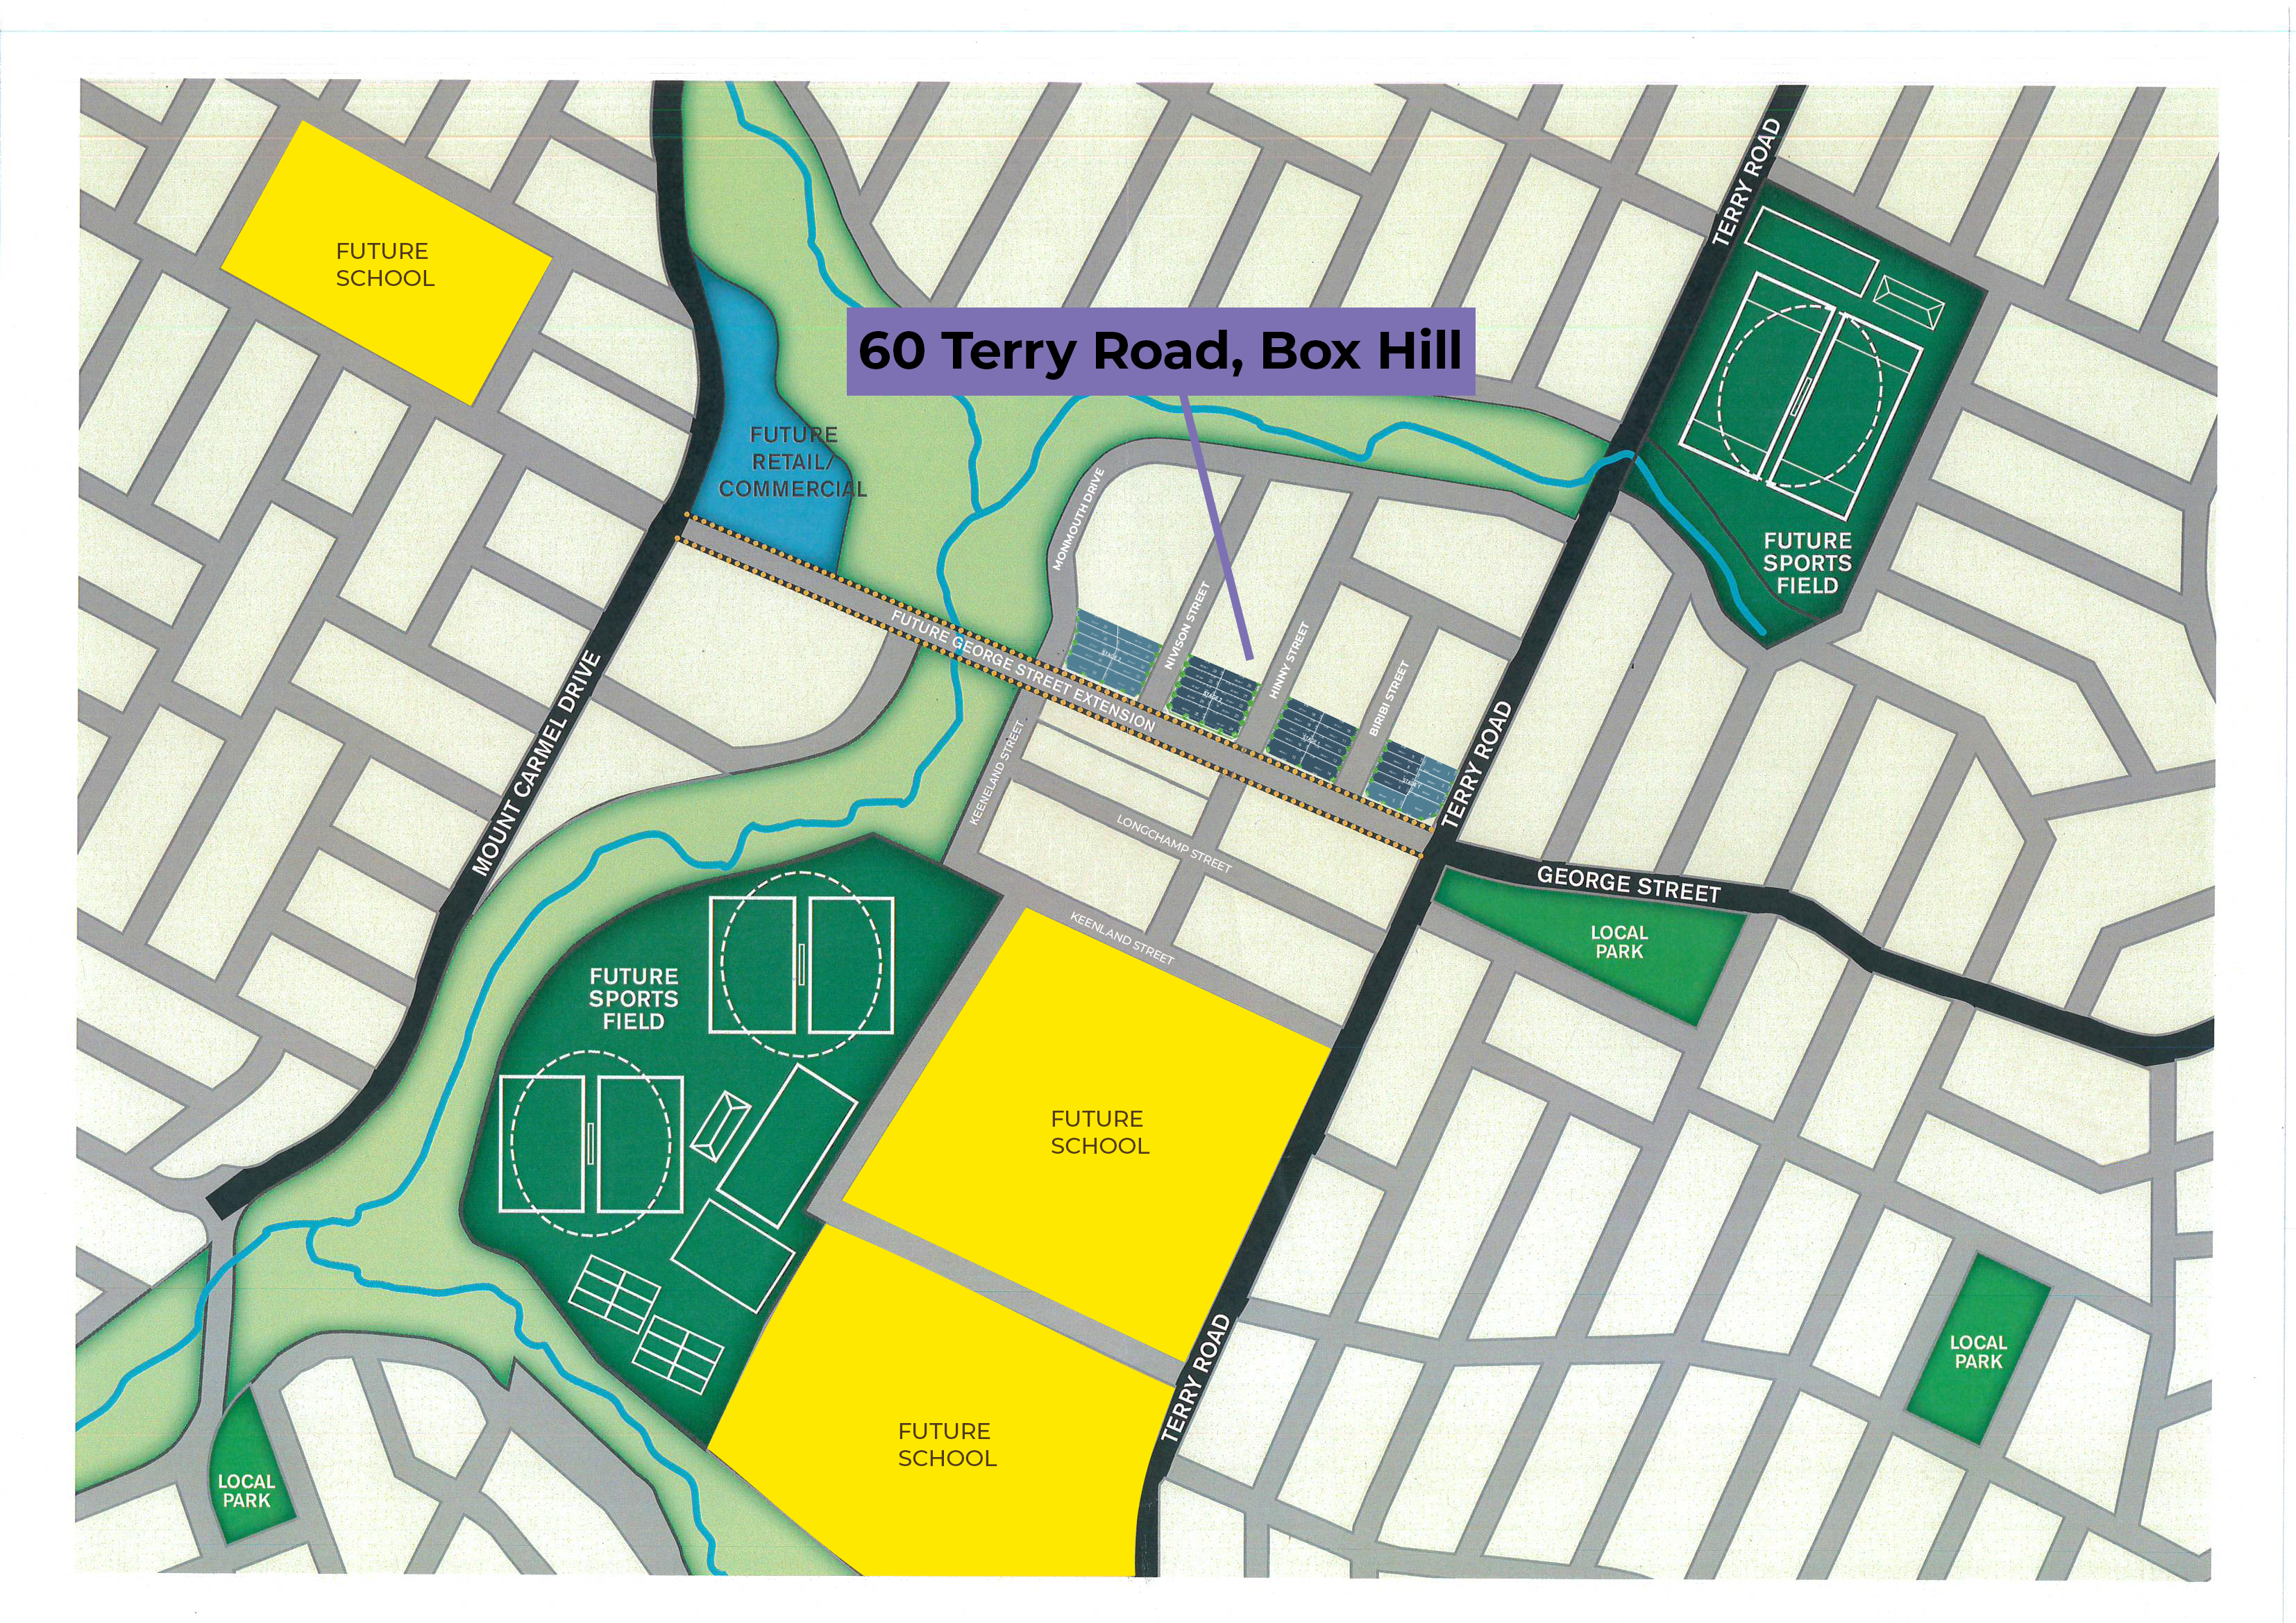 Map pointing 60 Terry Road, Box Hill - site of Elante Hills by Ellante Homes